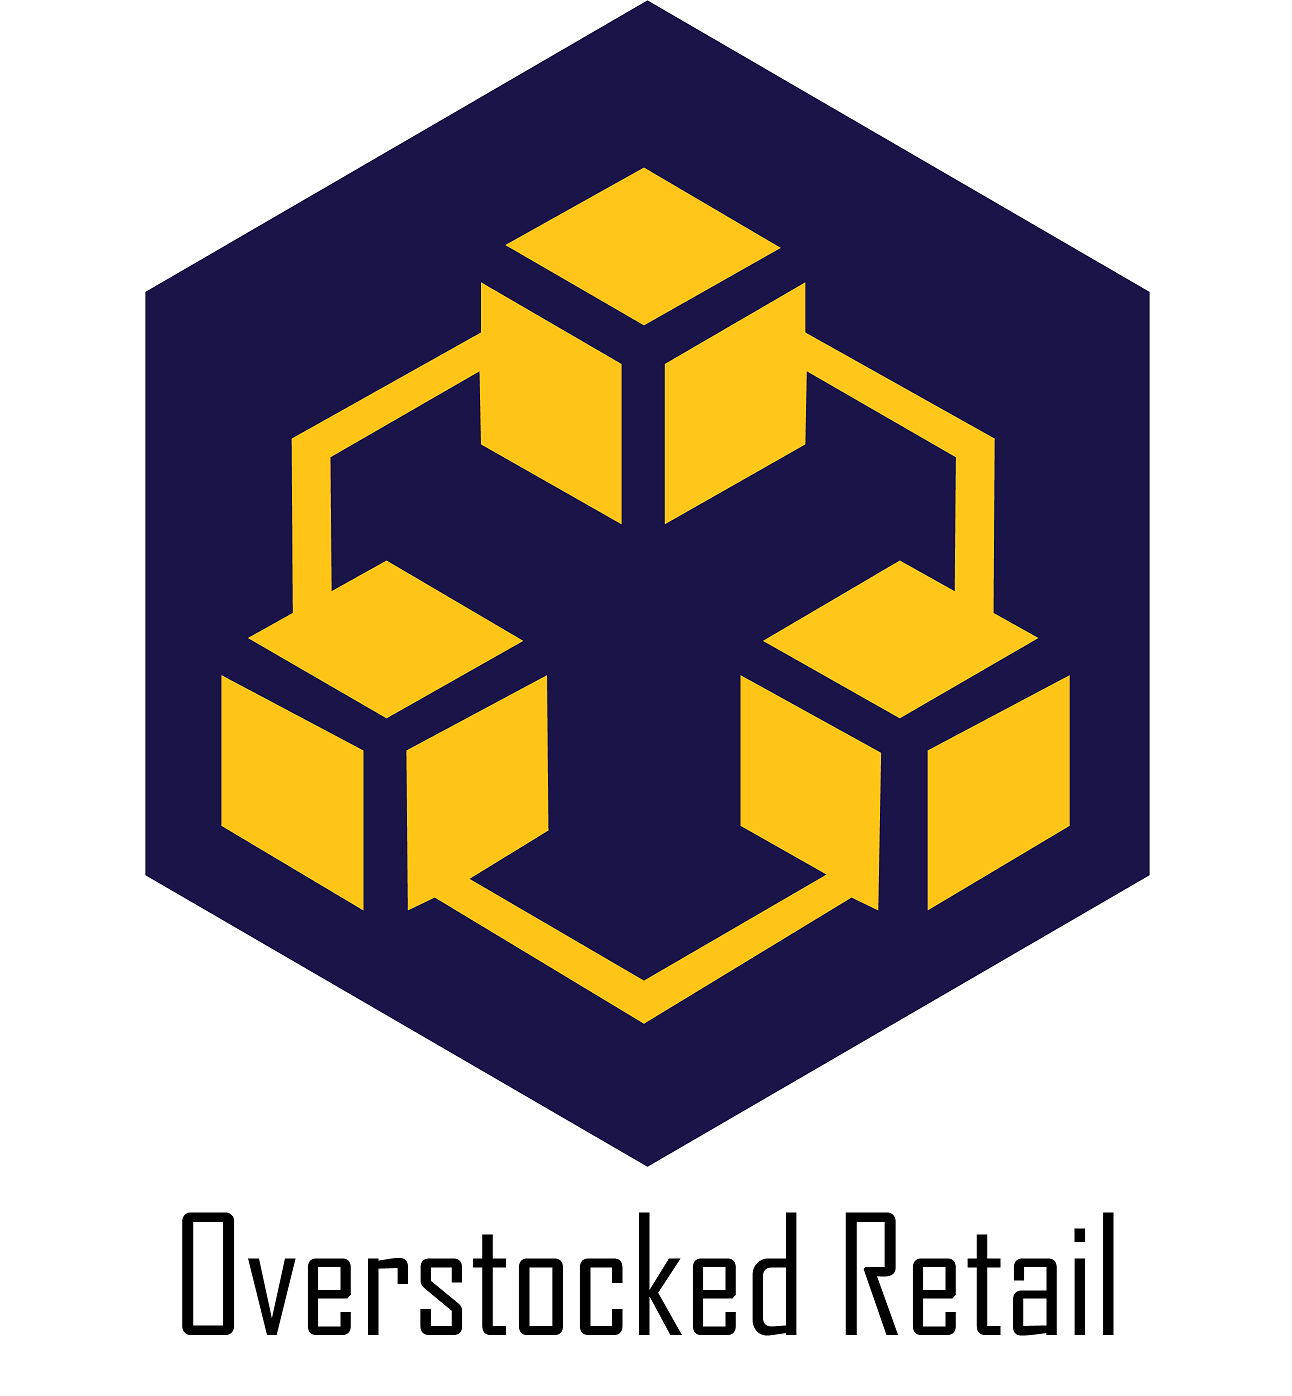 OverstockedLogowithtext - small.png